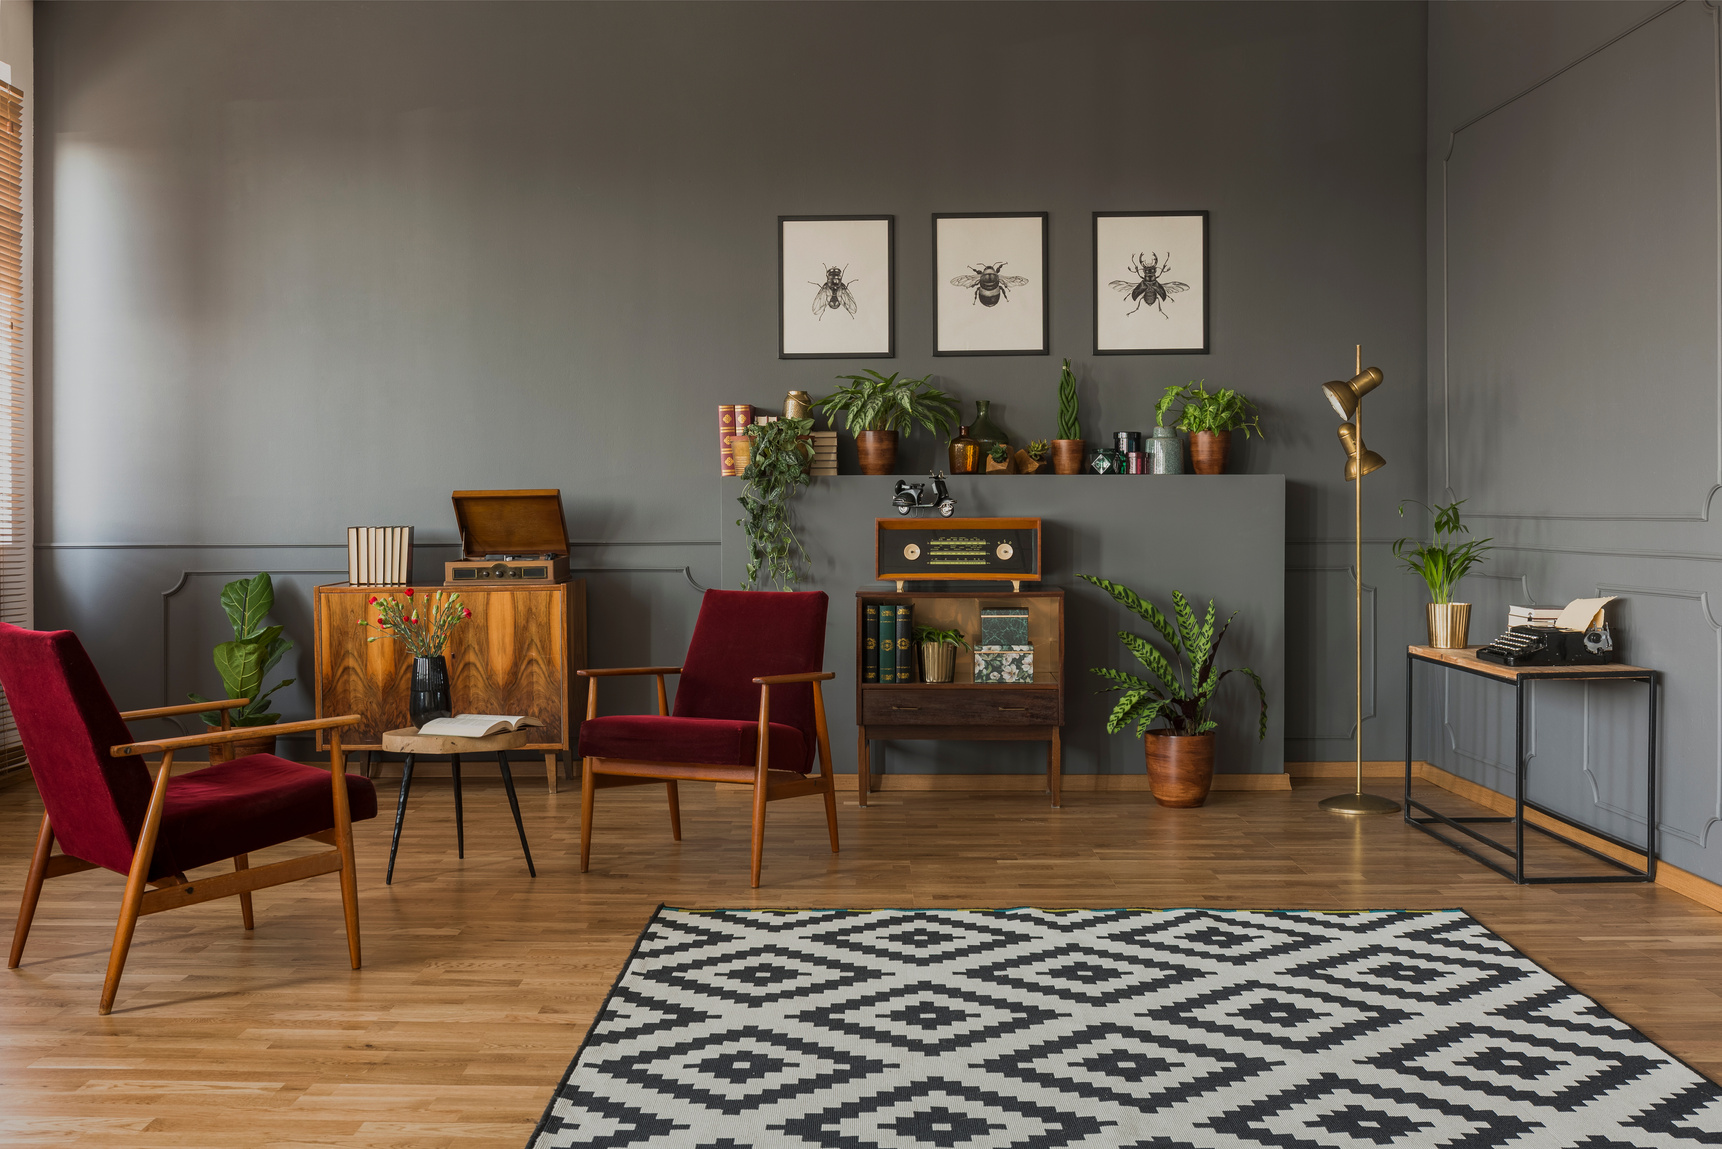 Patterned carpet in grey living room interior with dark red wooden armchairs and posters. Real photo